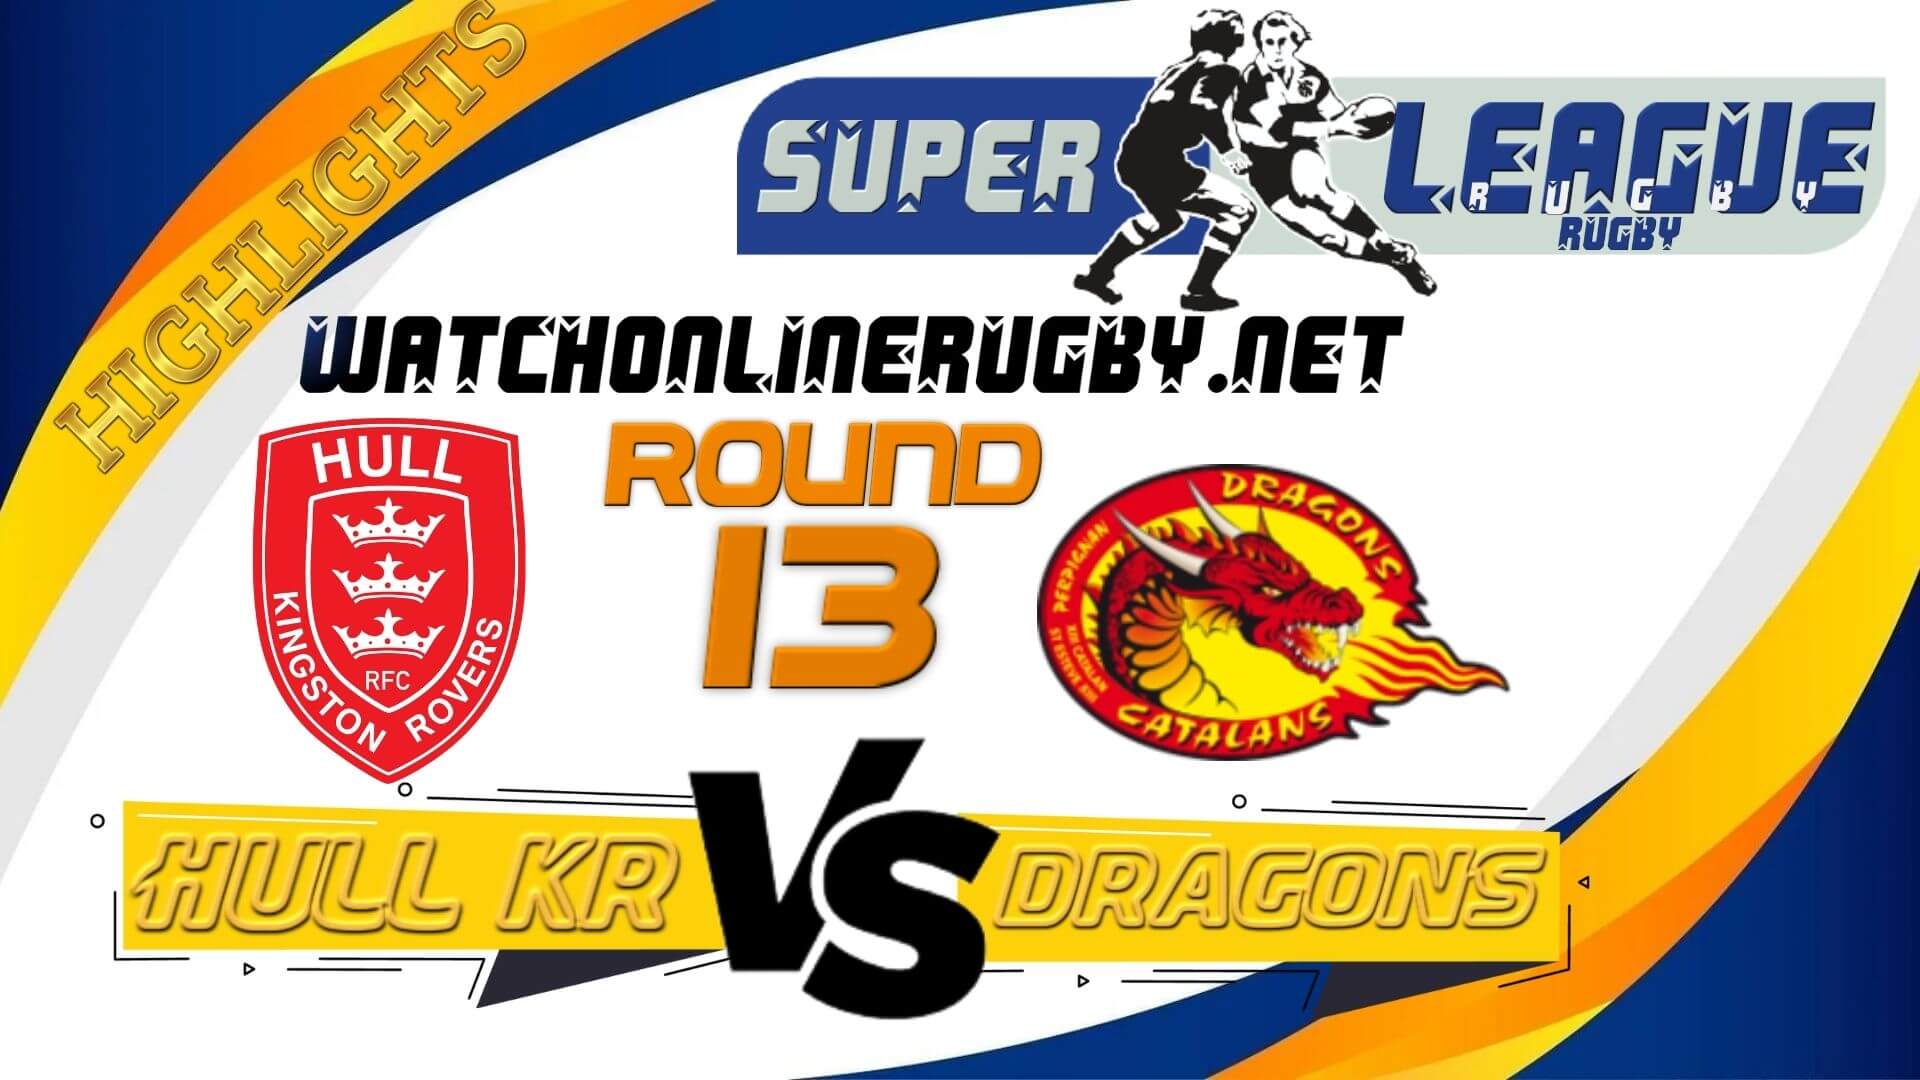 Hull KR Vs Catalans Dragons Super League Rugby 2022 RD 13